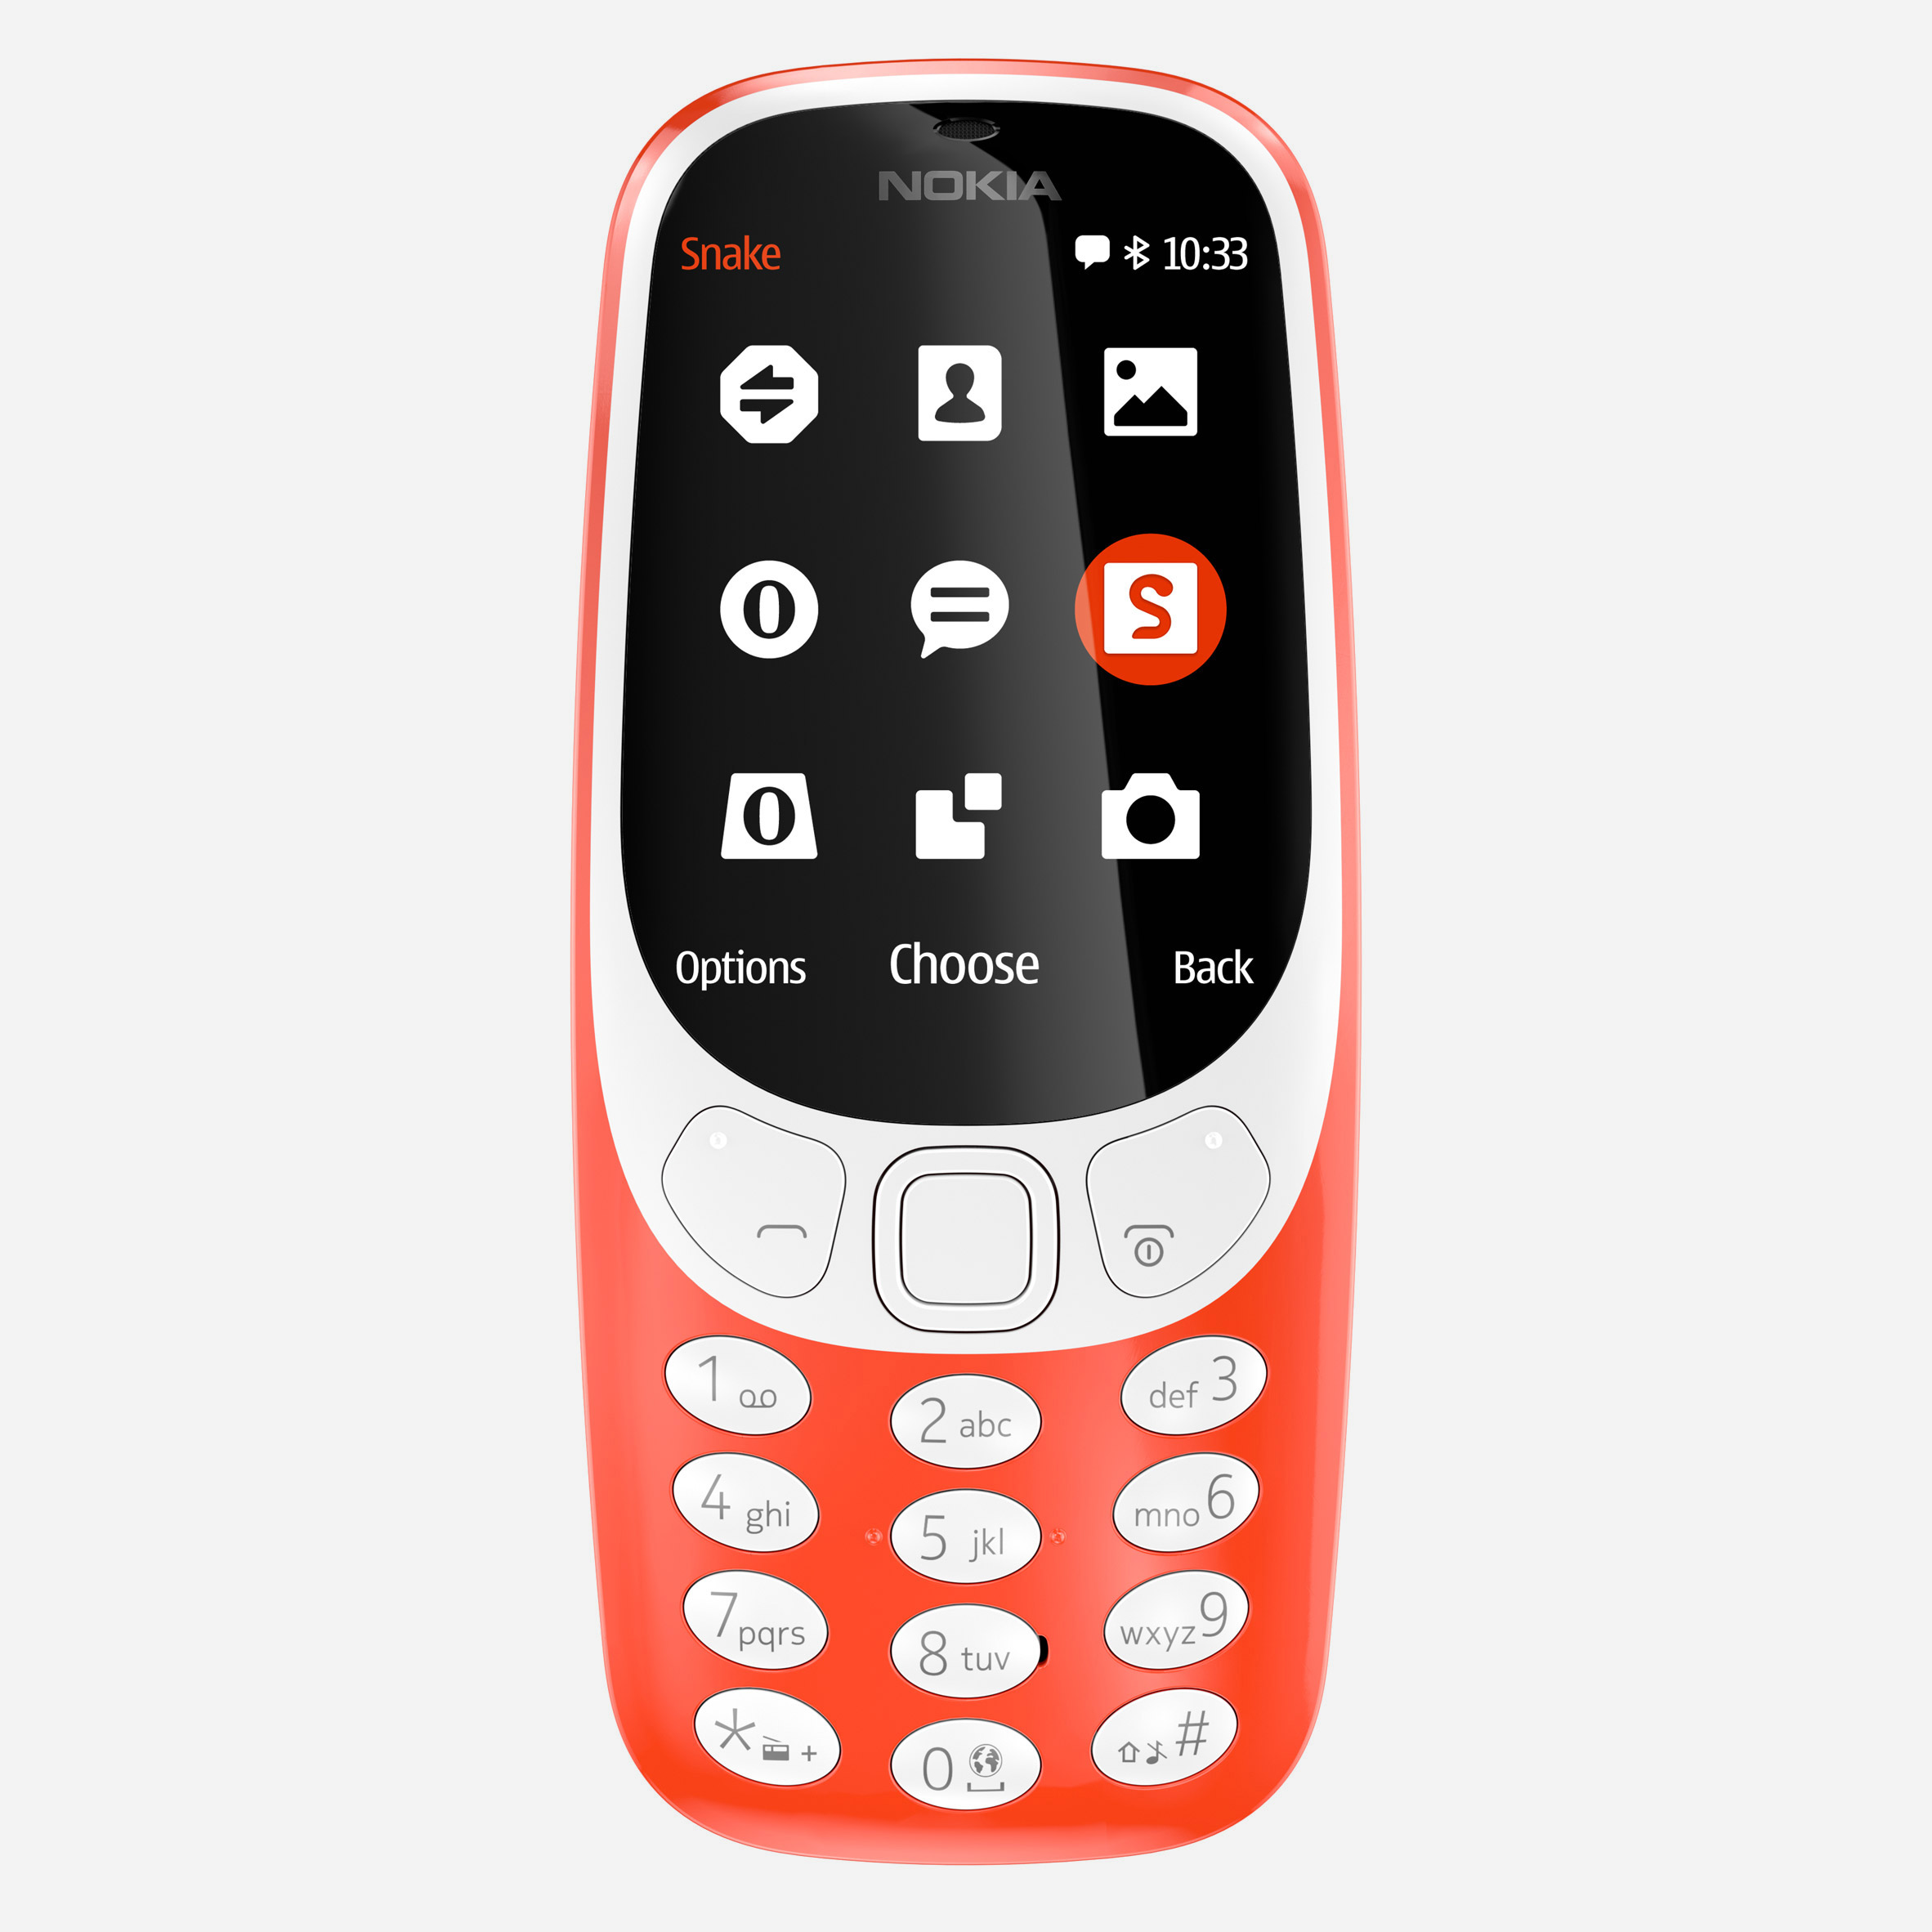 Nokia's Classic 3310 Phone Lives Again - And It Has 'Snake' Too